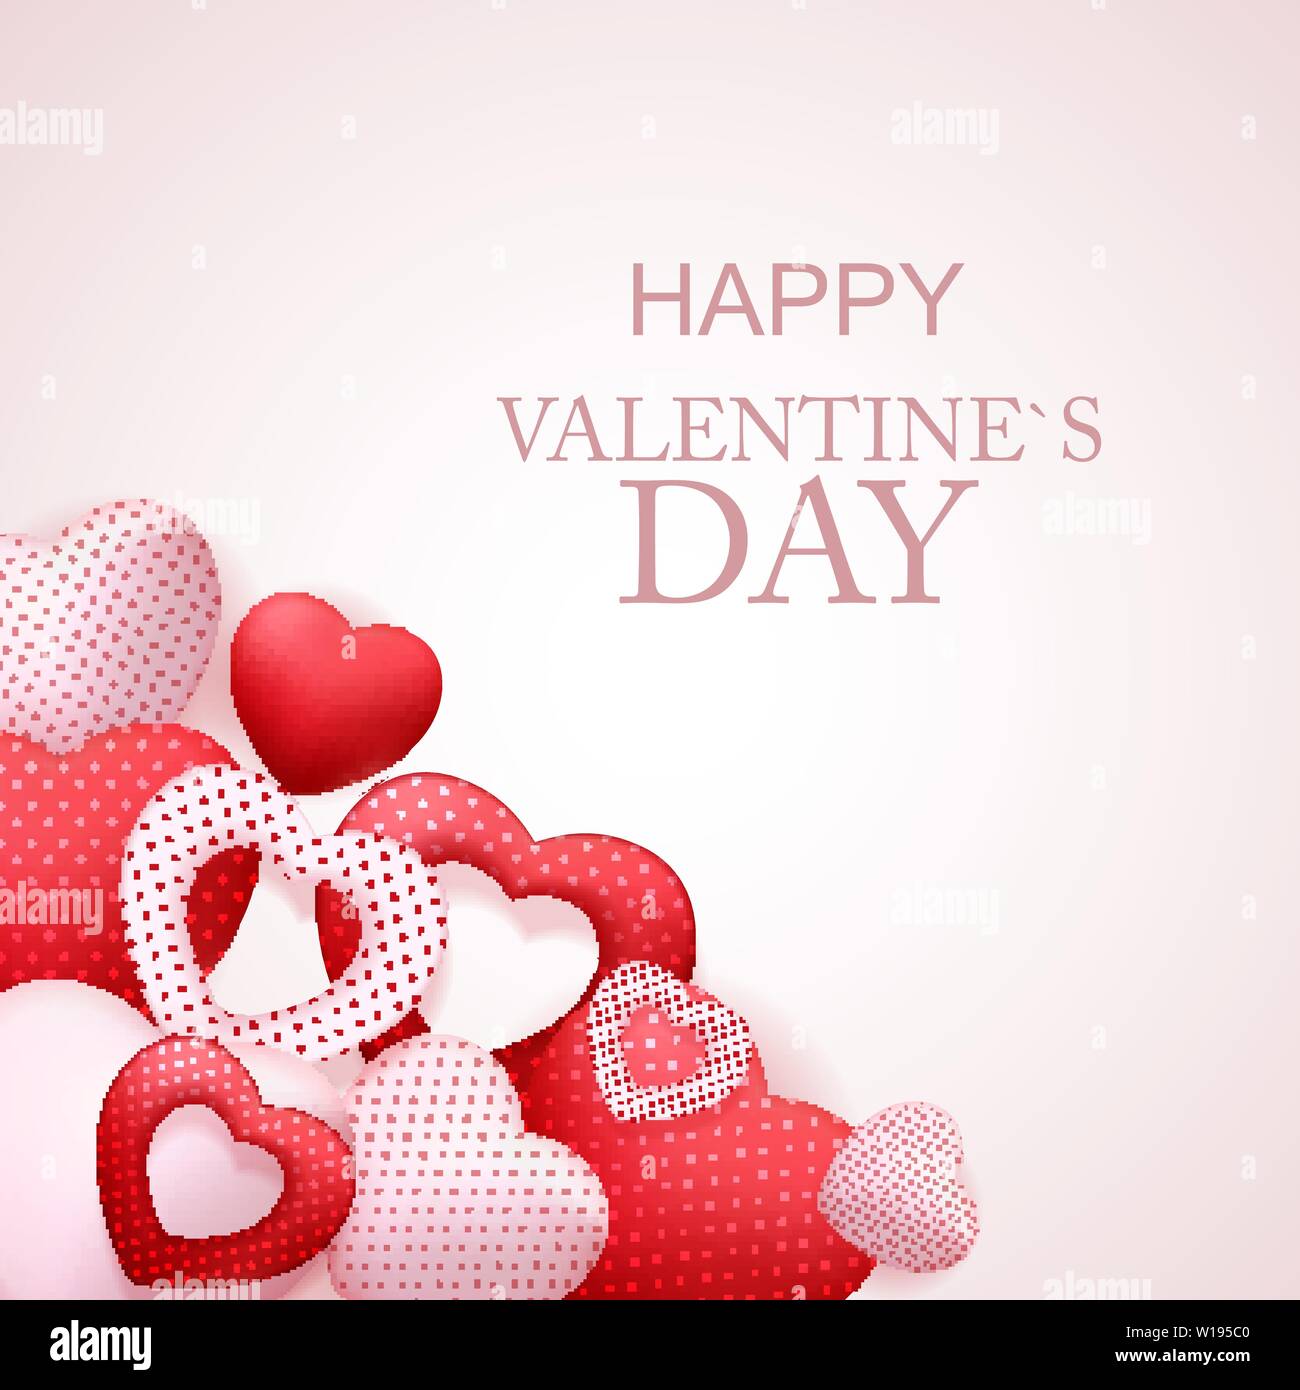 Happy Valentines Day Card with Heart. Vector Illustration Stock Vector ...